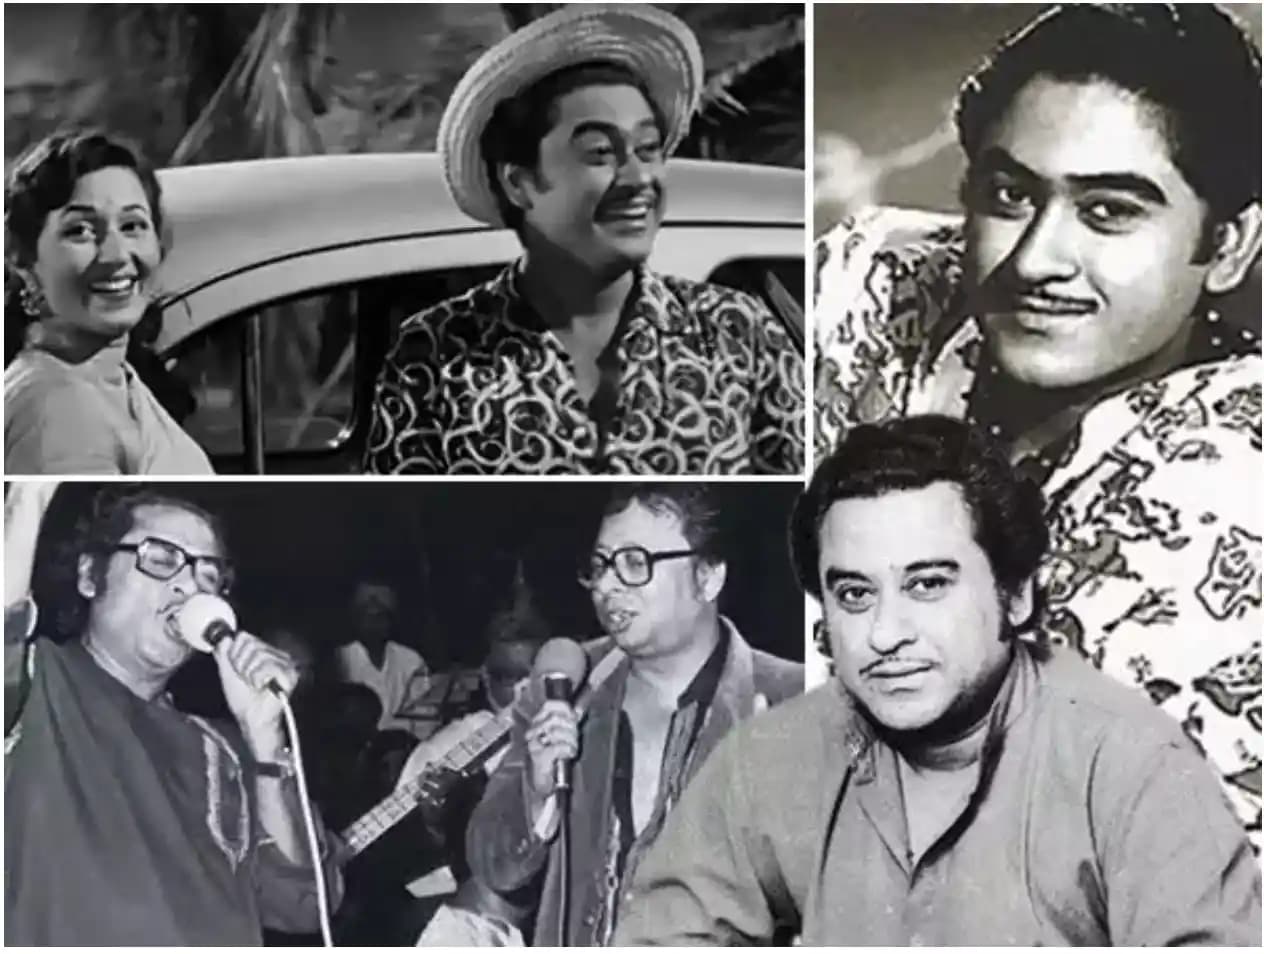 From Kishore Kumar to Neeti Mohan: The Use of Yodelling in Bollywood Music